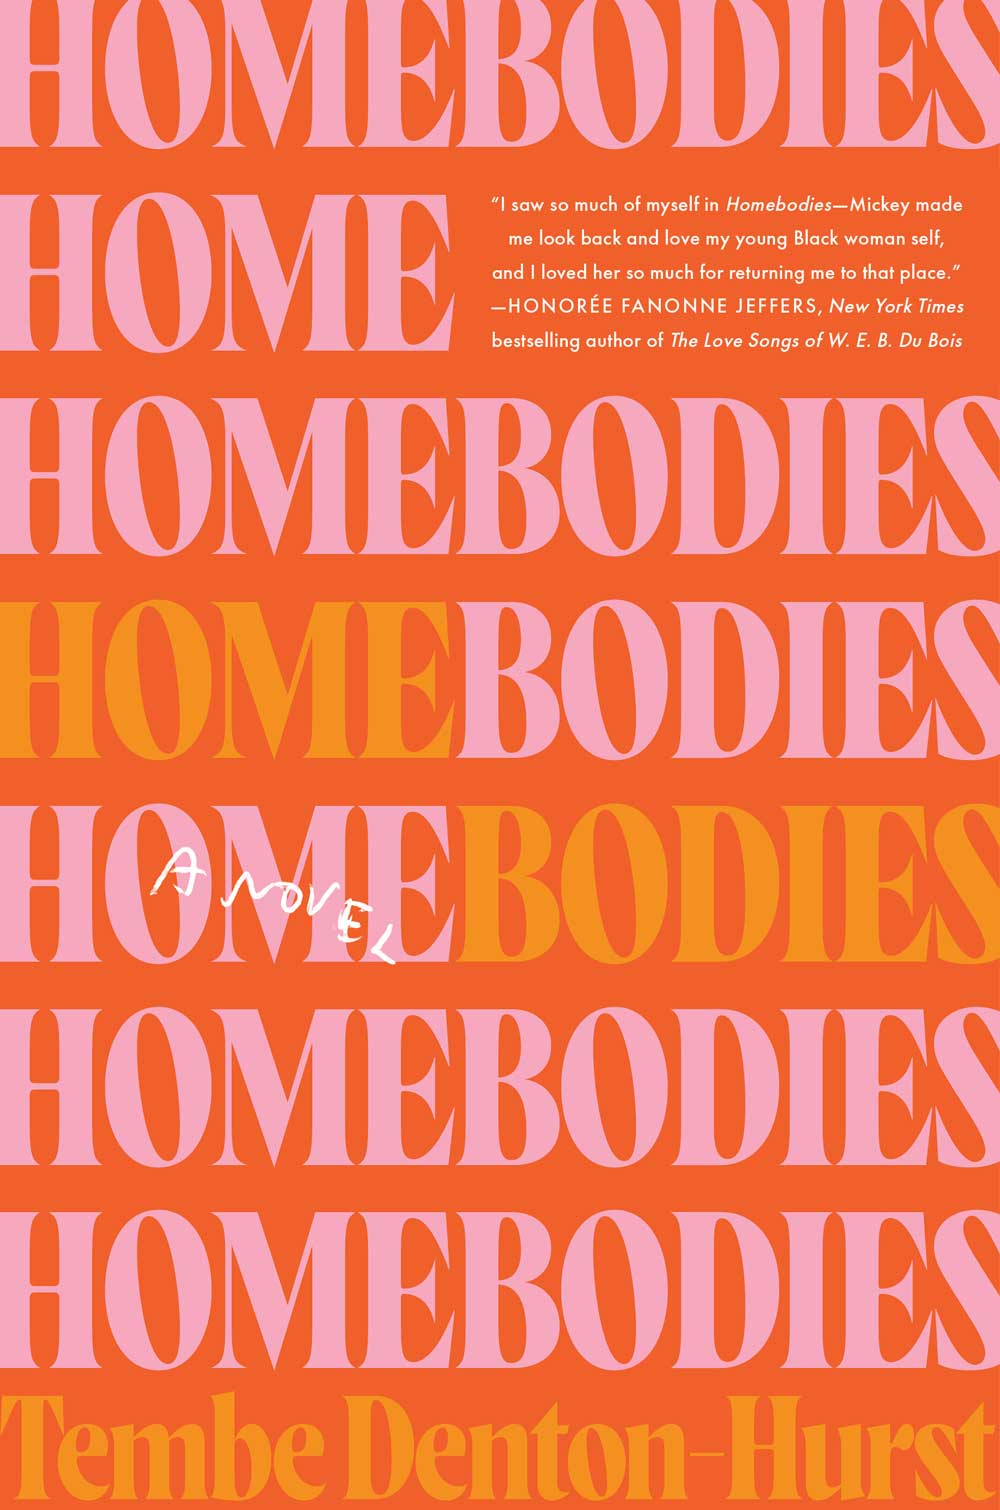 "Homebodies" written repeatedly in pink and orange on a darker orange background.